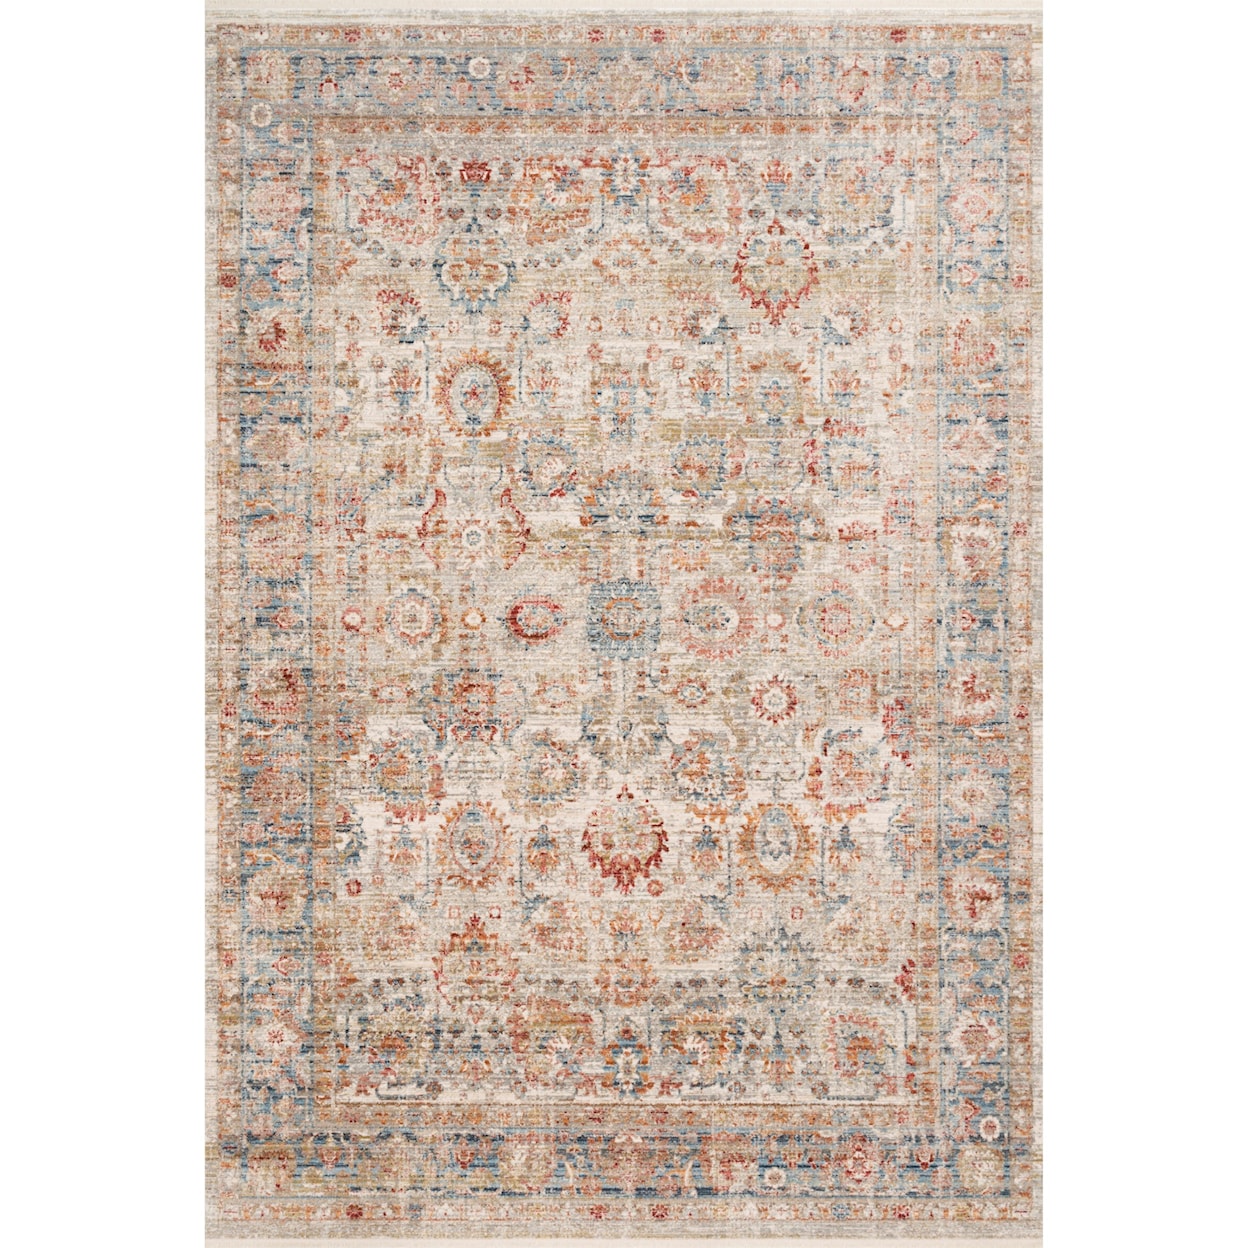 Reeds Rugs Claire 2'7" x 9'6" Ivory / Ocean Rug